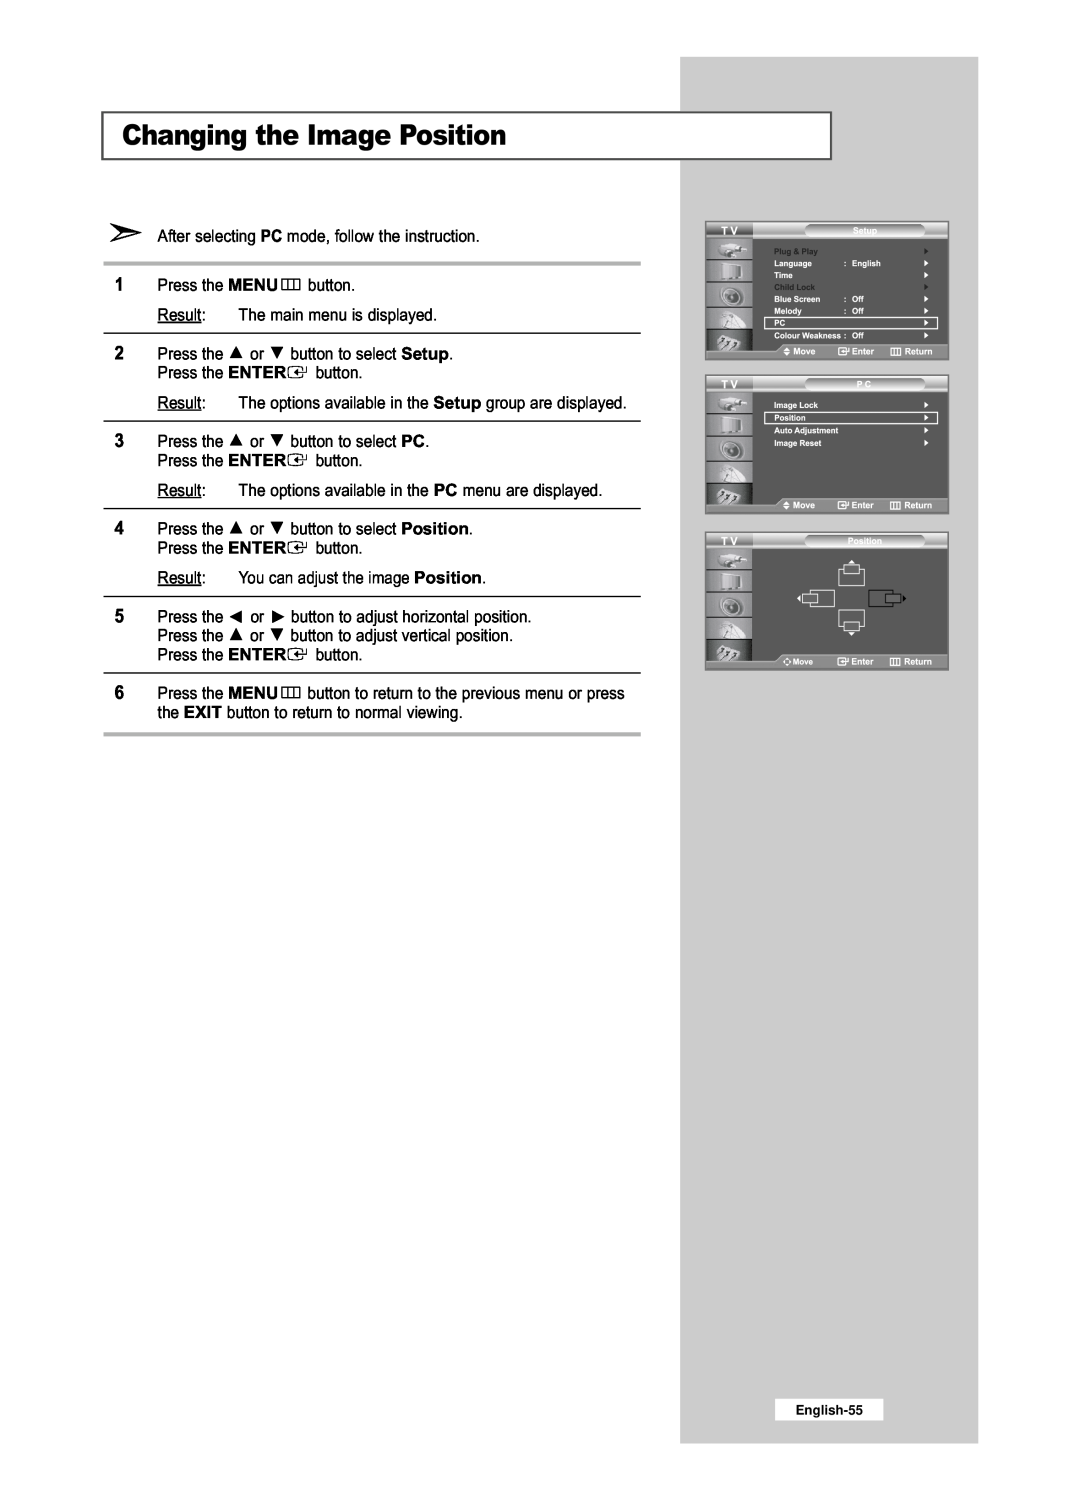 Samsung LE26R53BD, LE32R53BD manual Changing the Image Position, English-55 